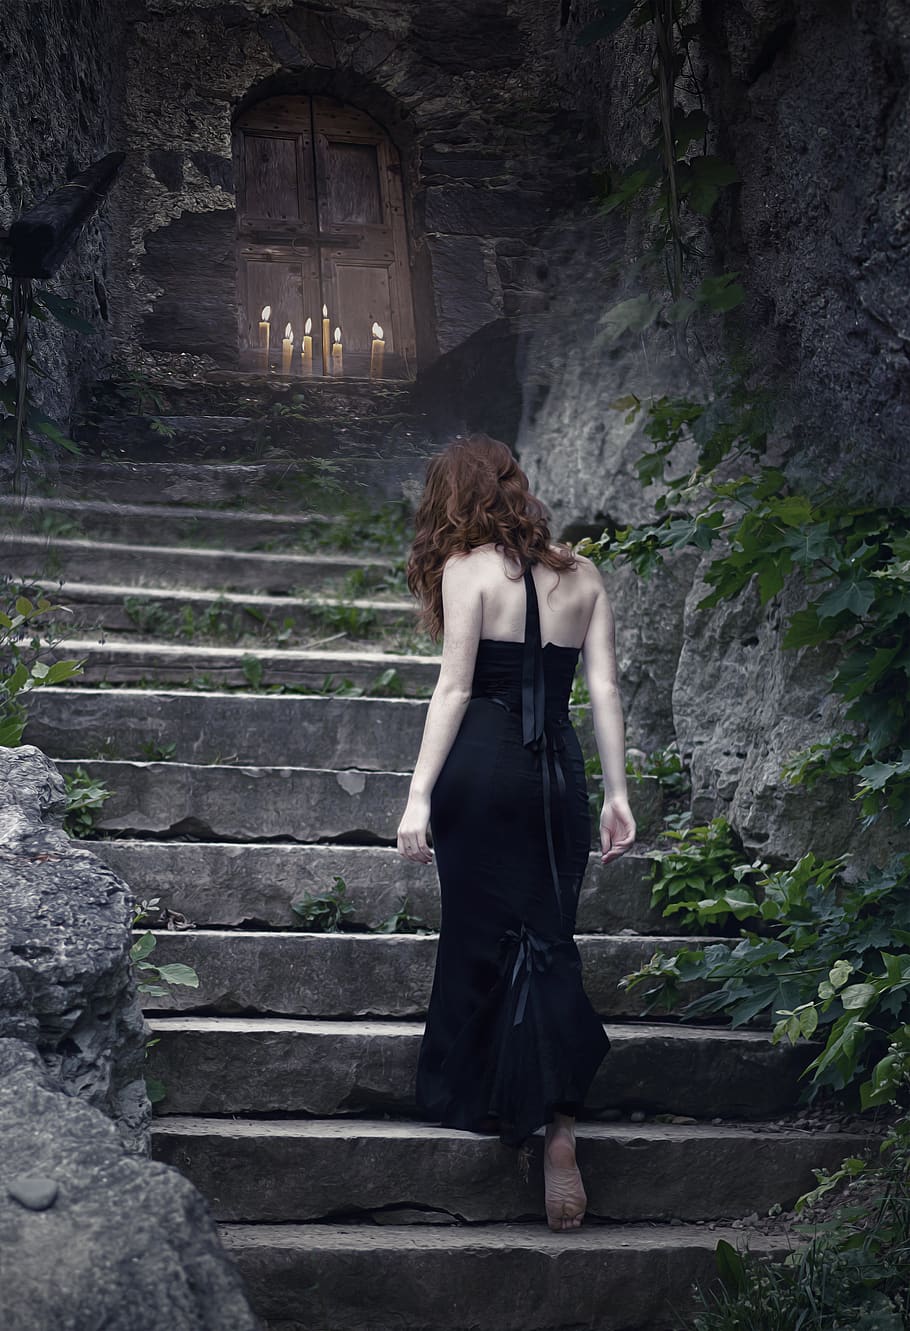 witch, sorceress, fantasy, dark, gothic, stairs, door, candles, ritual, magic